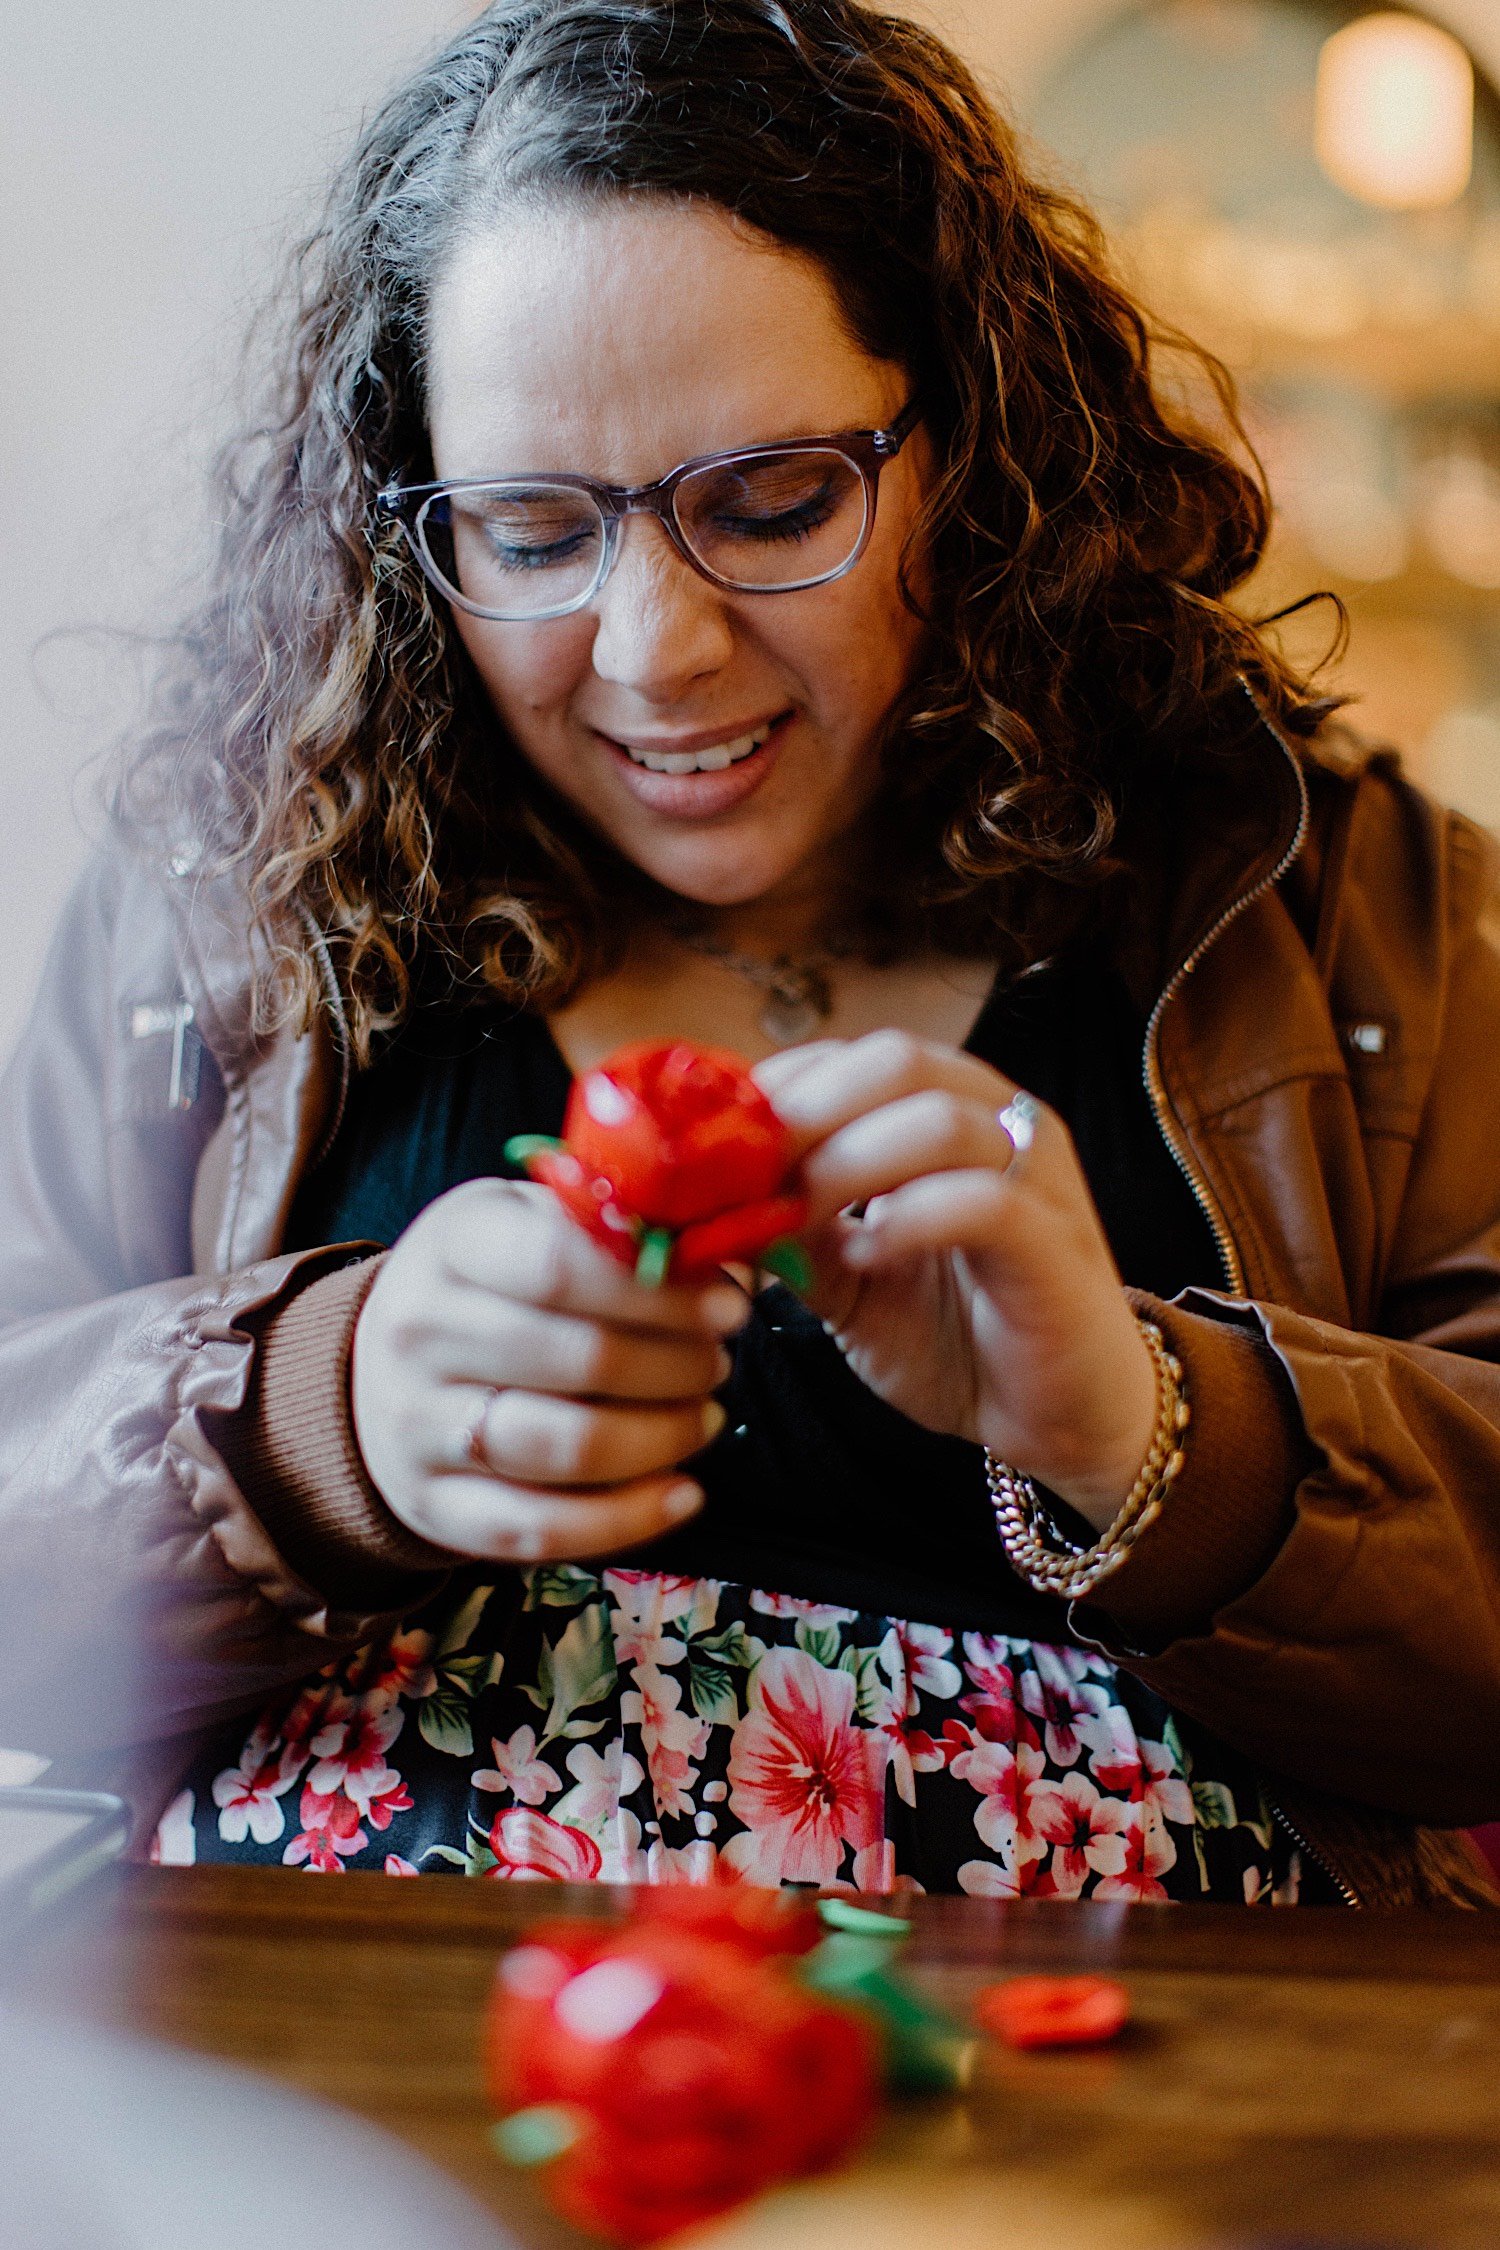 Woman putting a Lego rose together in a restaurant